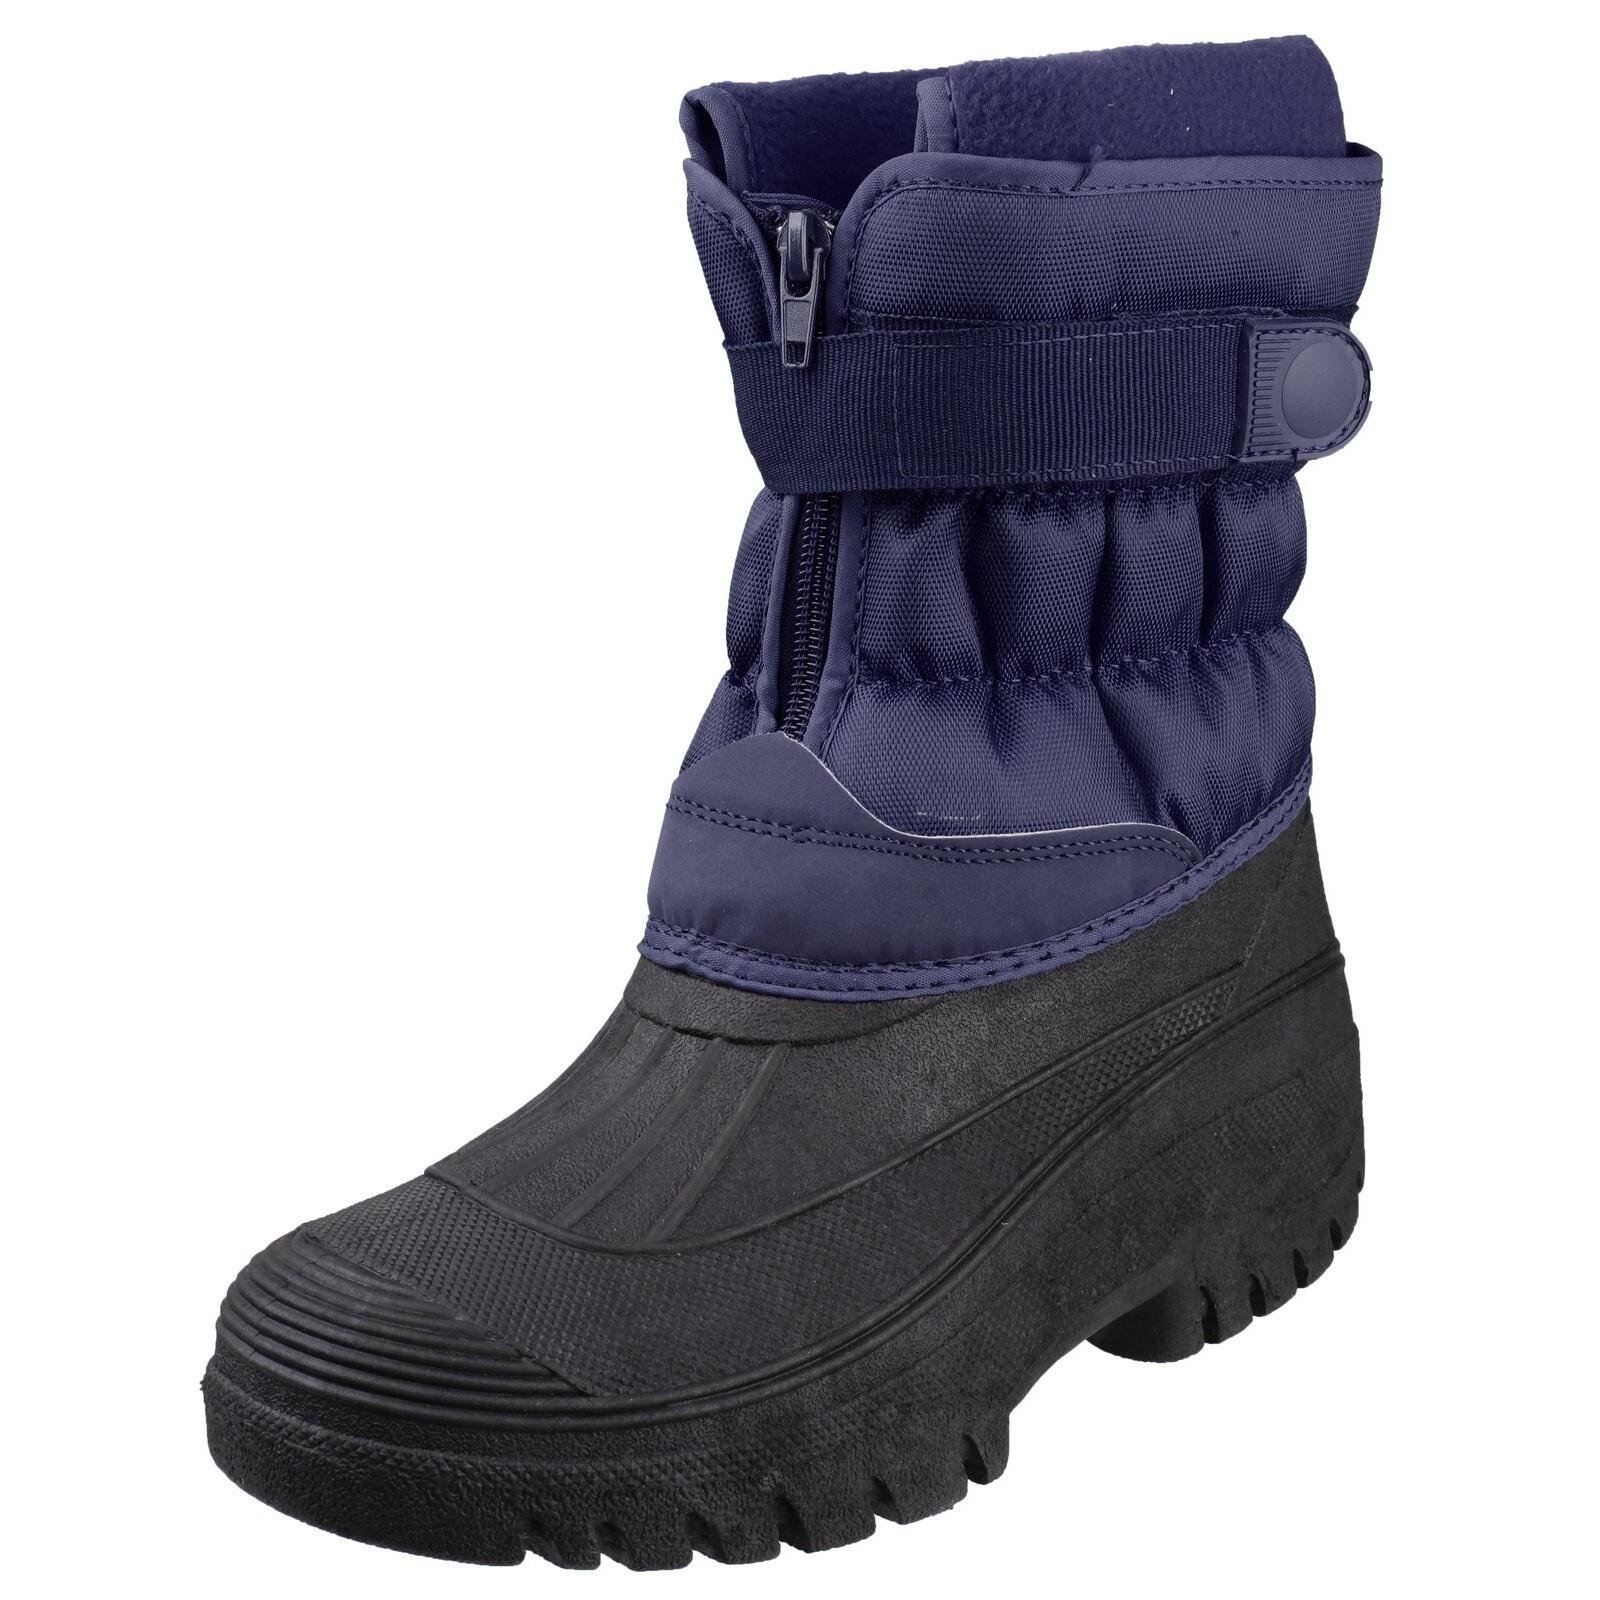 Childrens/Kids Chase Wellington Boots (Navy) 4/5